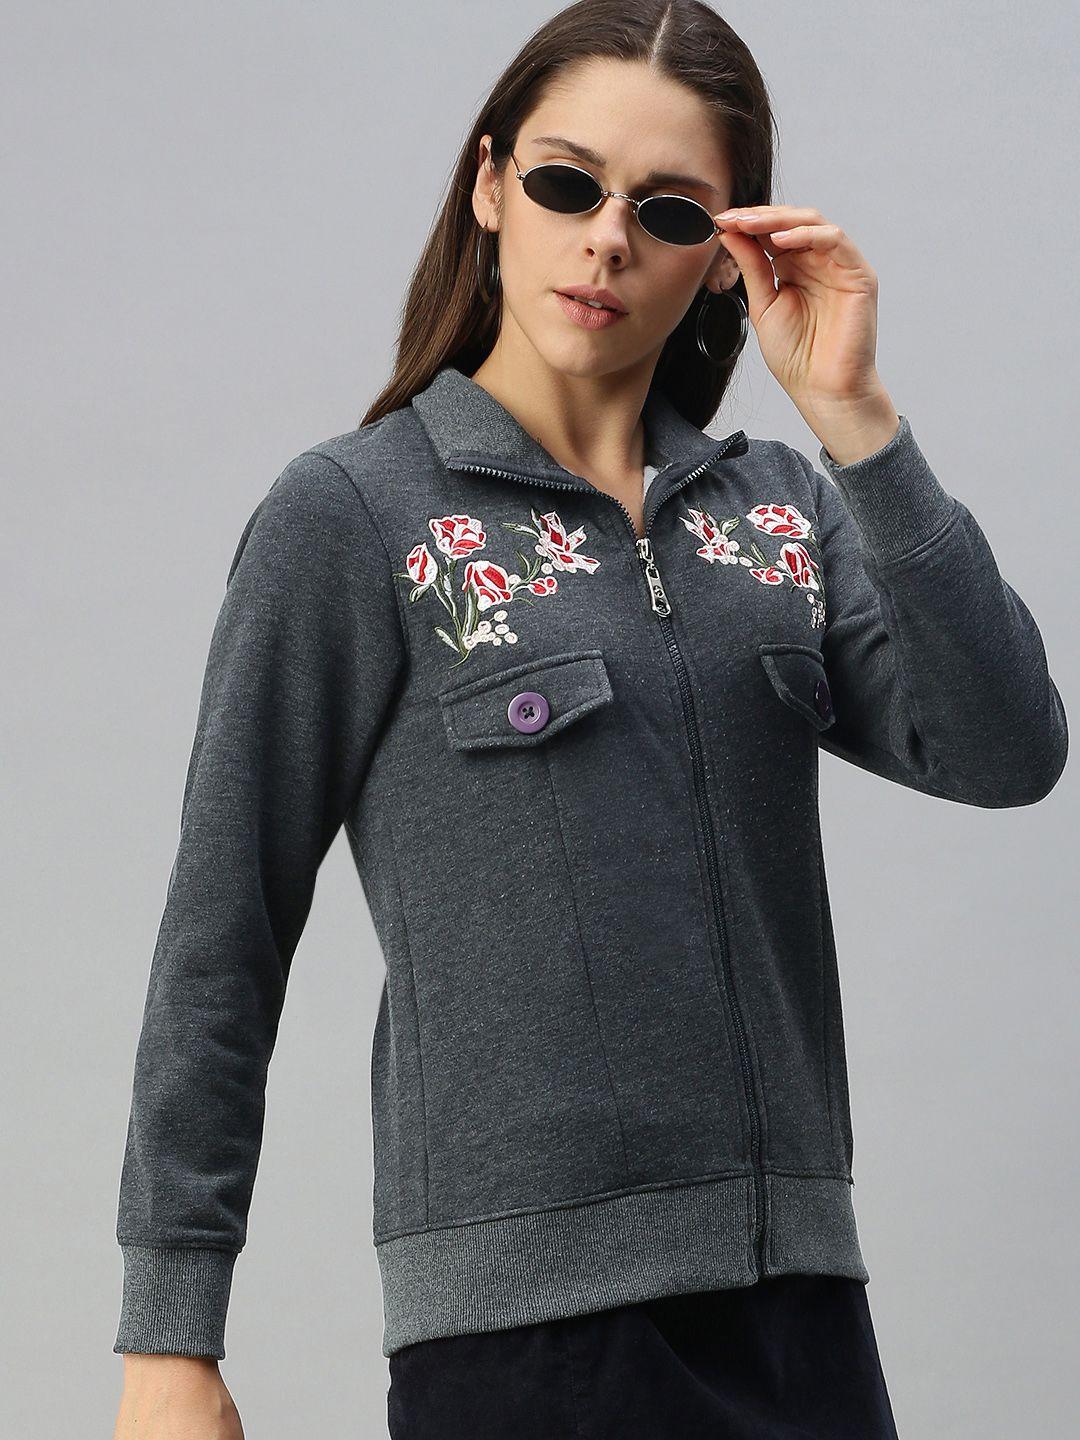 campus-sutra-women-charcoal-grey-embroidered-sweatshirt